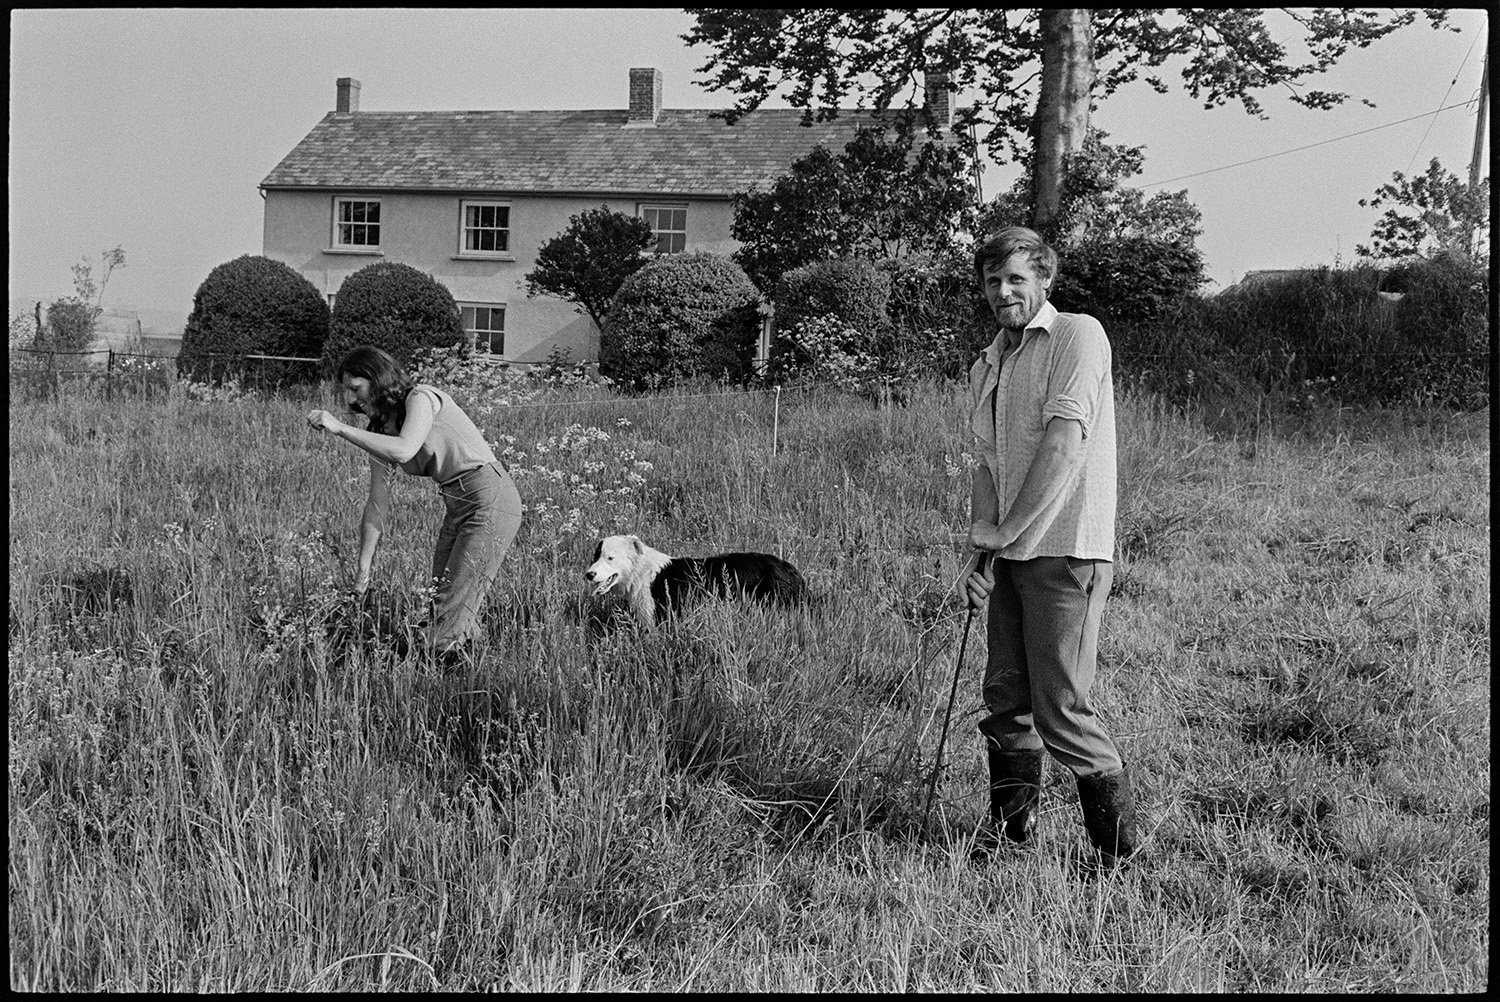 Farmer and wife checking fence and putting cows into field. 
[A man and woman checking an electric fence in a field at Sheepwash. They are accompanied by a dog and the farmhouse and trees and bushes are visible in the background.]